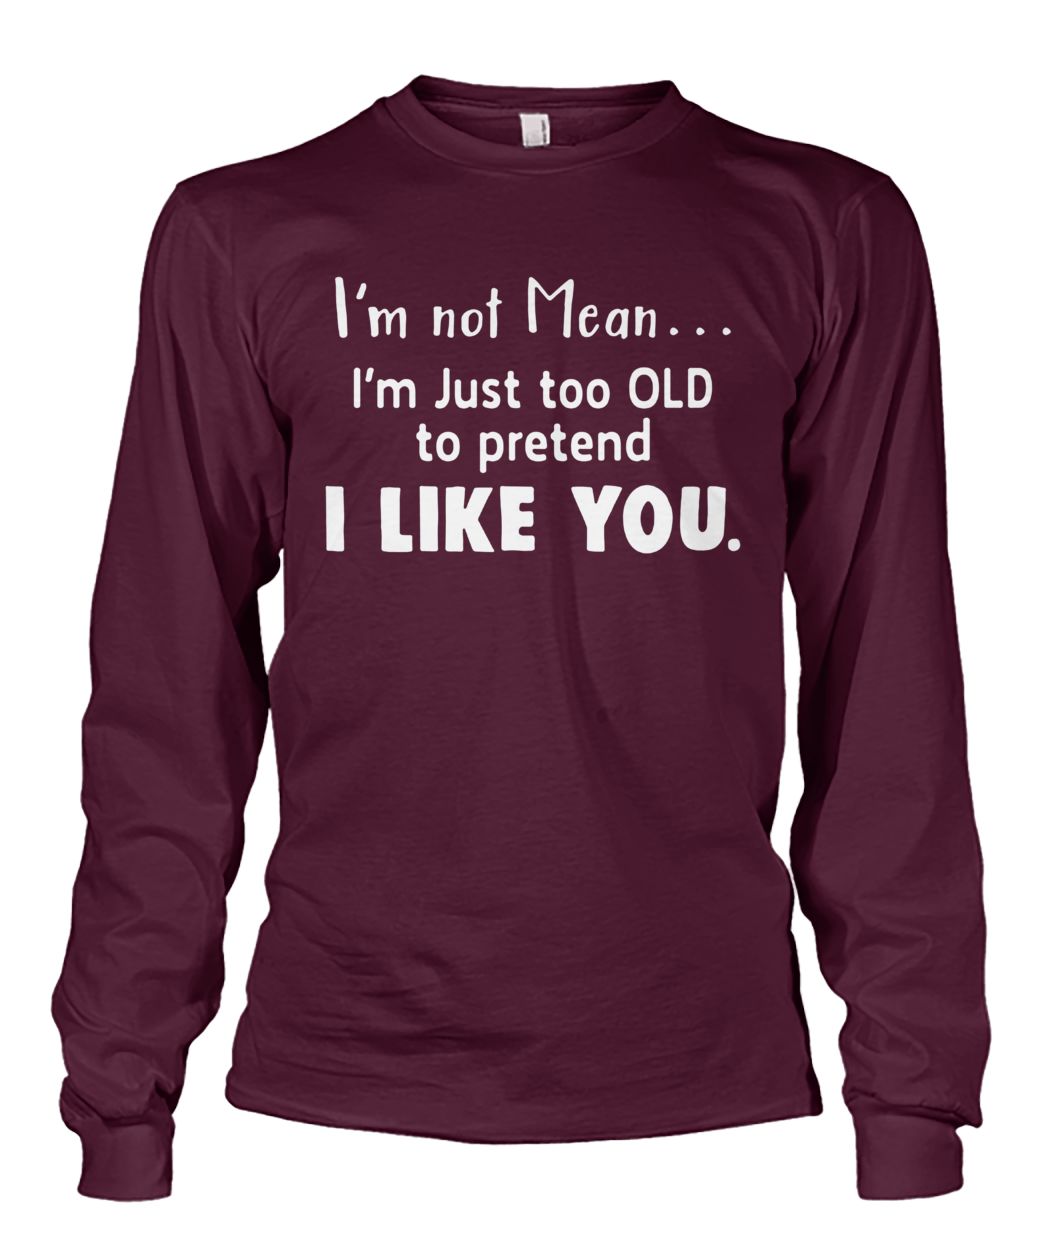 I'm not mean I'm just too old to pretend I like you unisex long sleeve